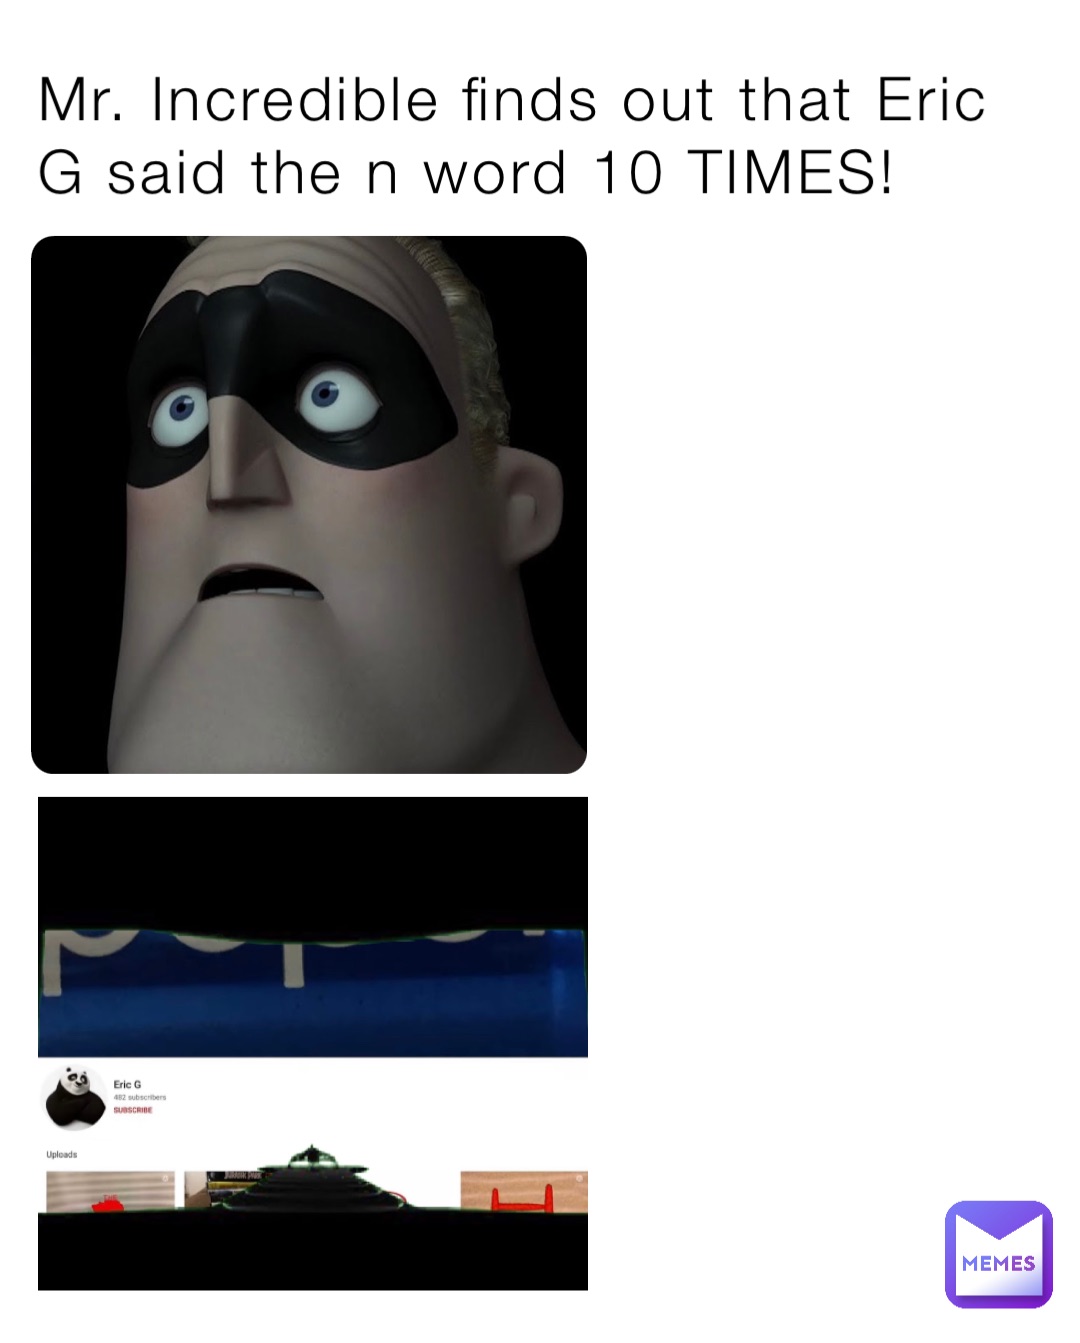 Mr. Incredible finds out that Eric G said the n word 10 TIMES!